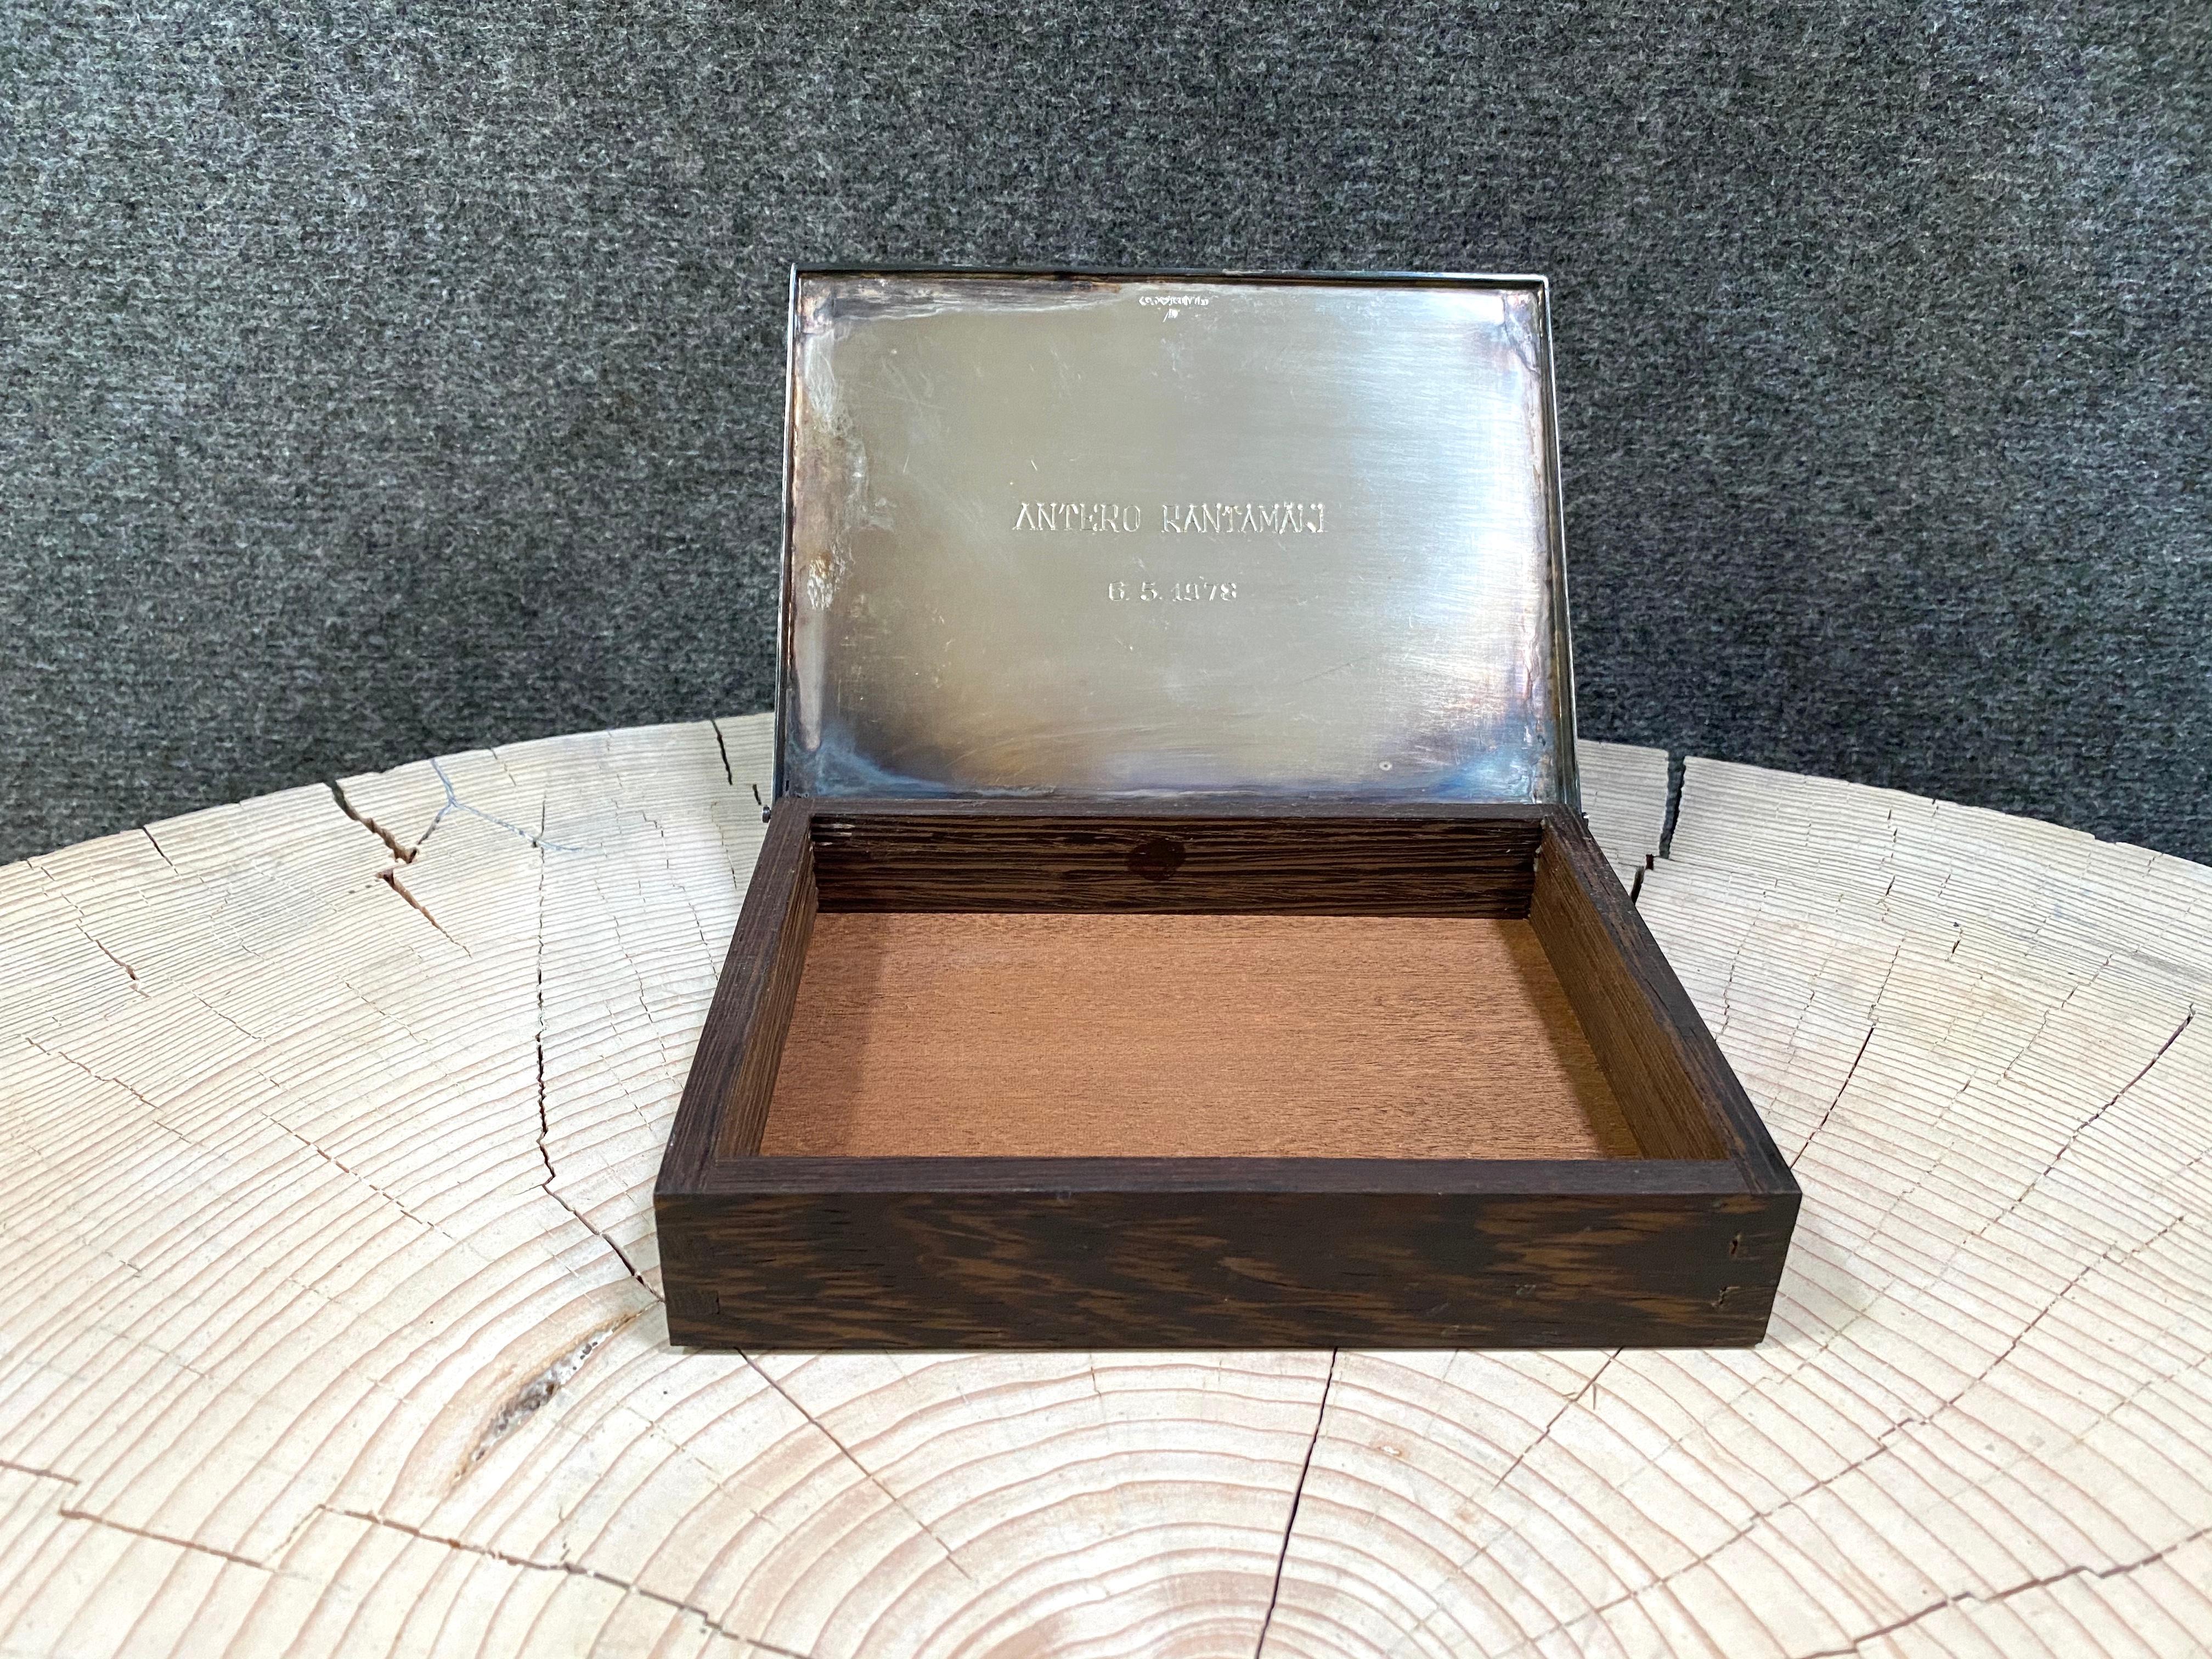 Rare Silver 830 and Teak Finland 1976 Tapio Wirkkala Tobacco Cigar Box.
These are made to order only.

Engraving on the inside, and logo engraving on the cover.
Not polished or cleaned.
Fine box with polish for direct use.

Tapio Wirkkala